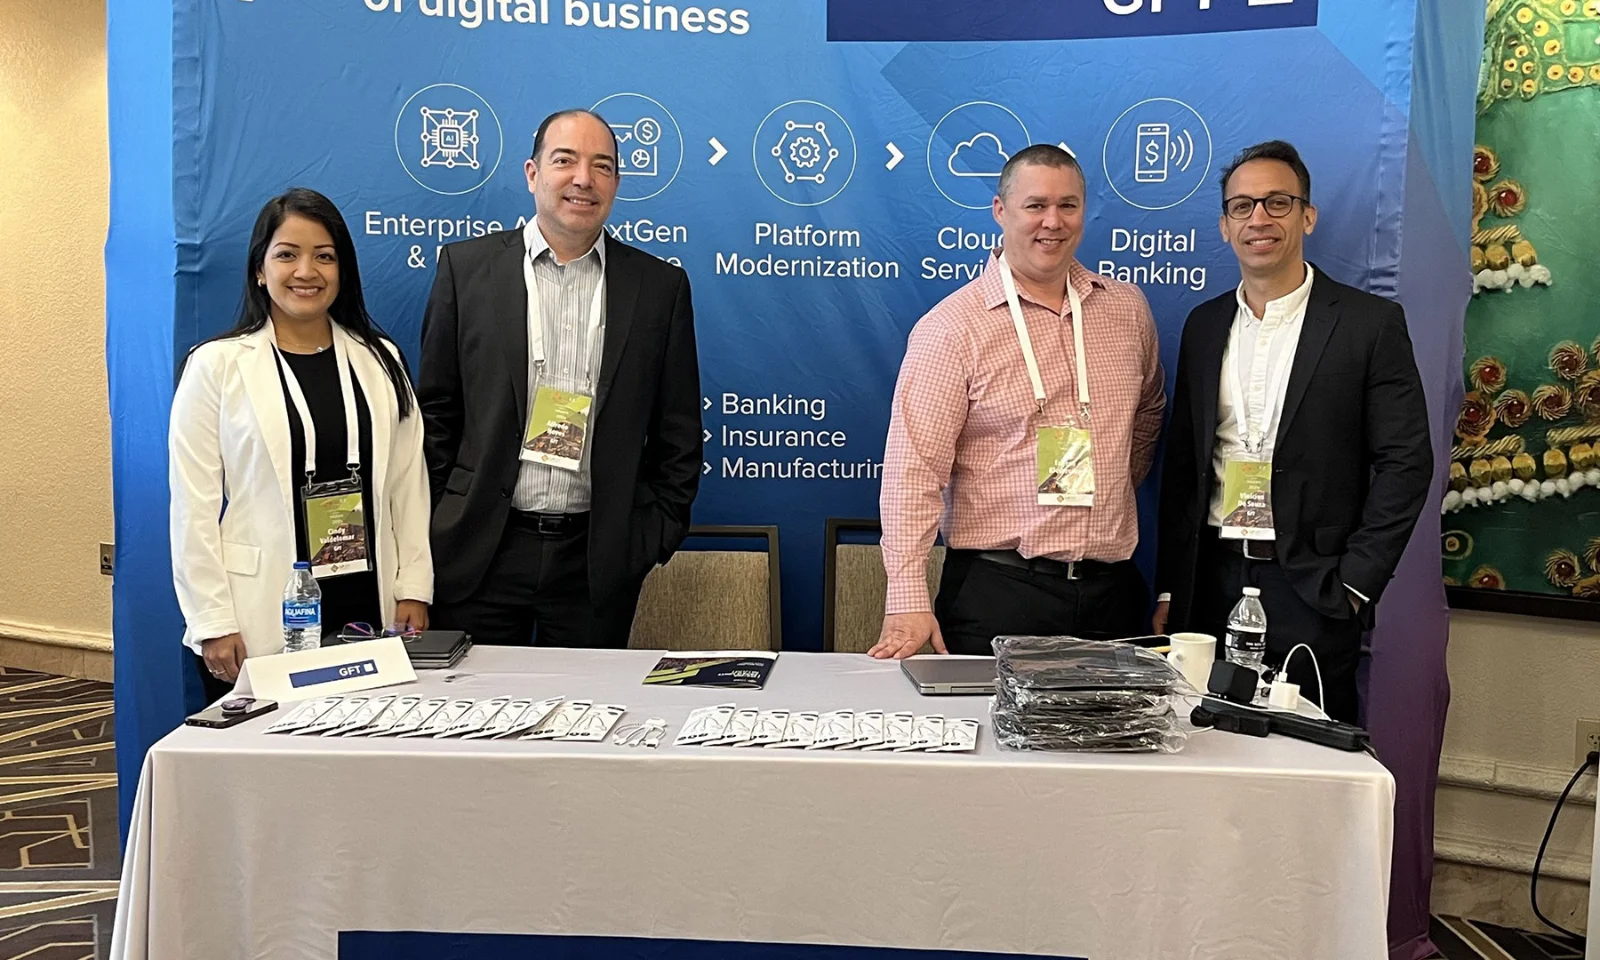 Discover GFT&#039;s participation at the LPGP Connect 2024 event, where our team showcased innovative digital business solutions in banking, insurance, and manufacturing. See our representatives engaging with industry leaders and demonstrating our commitment to platform modernization, cloud services, and digital banking advancements.